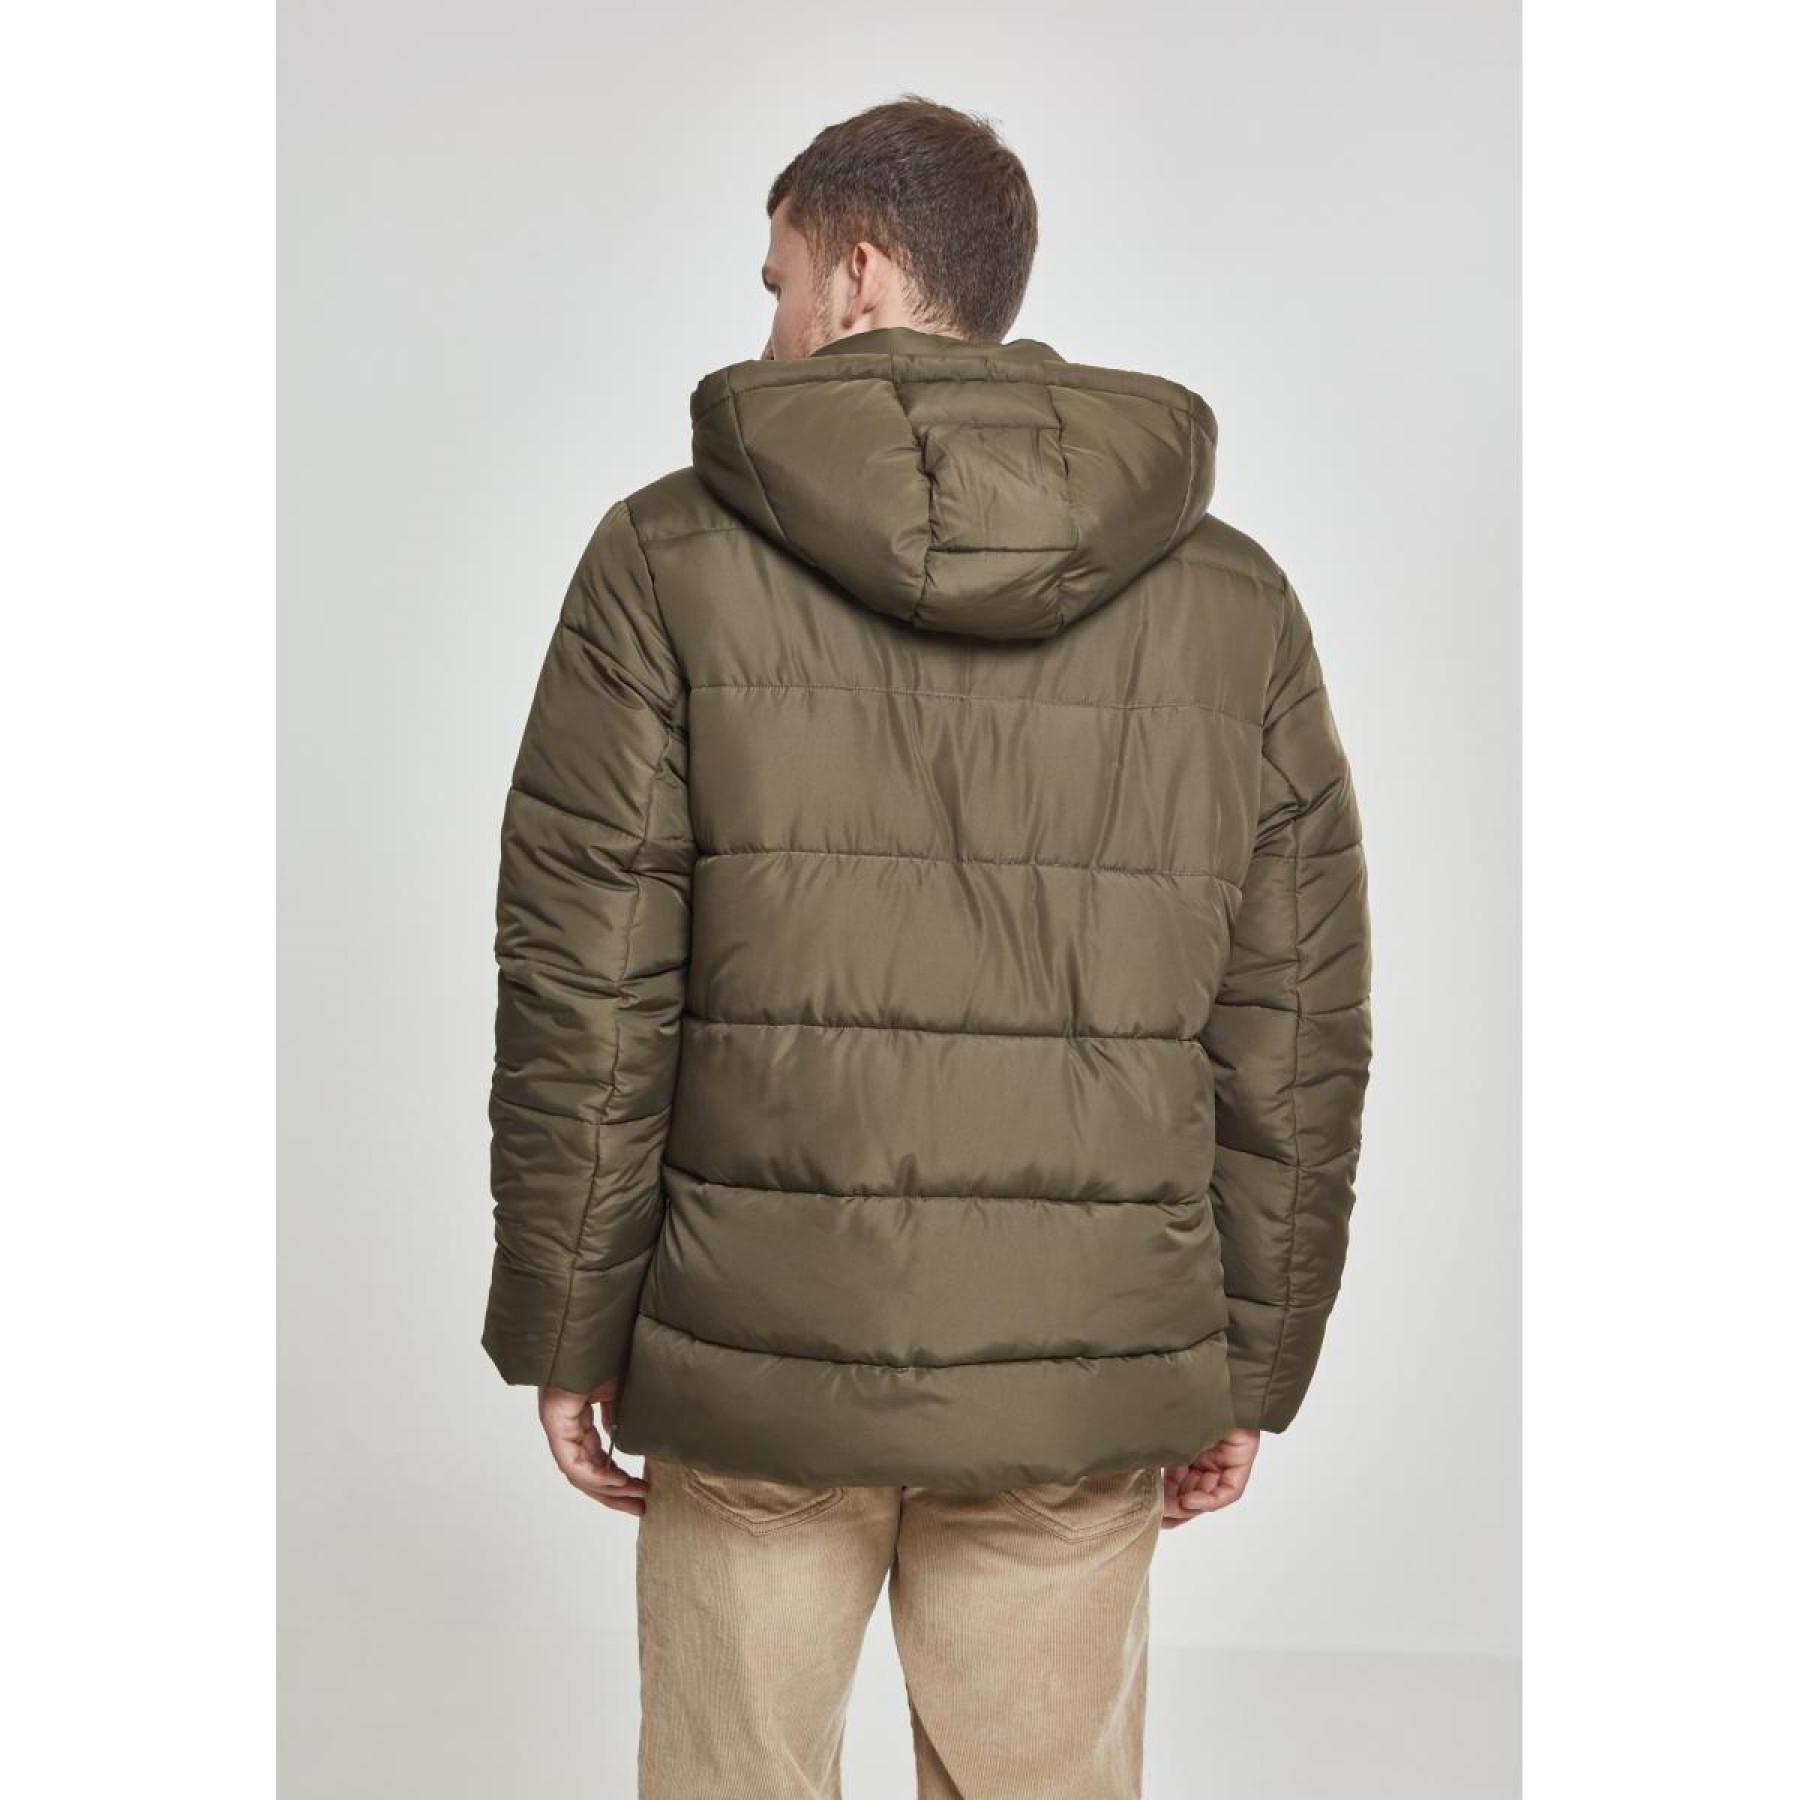 Parka Urban Classic pull over